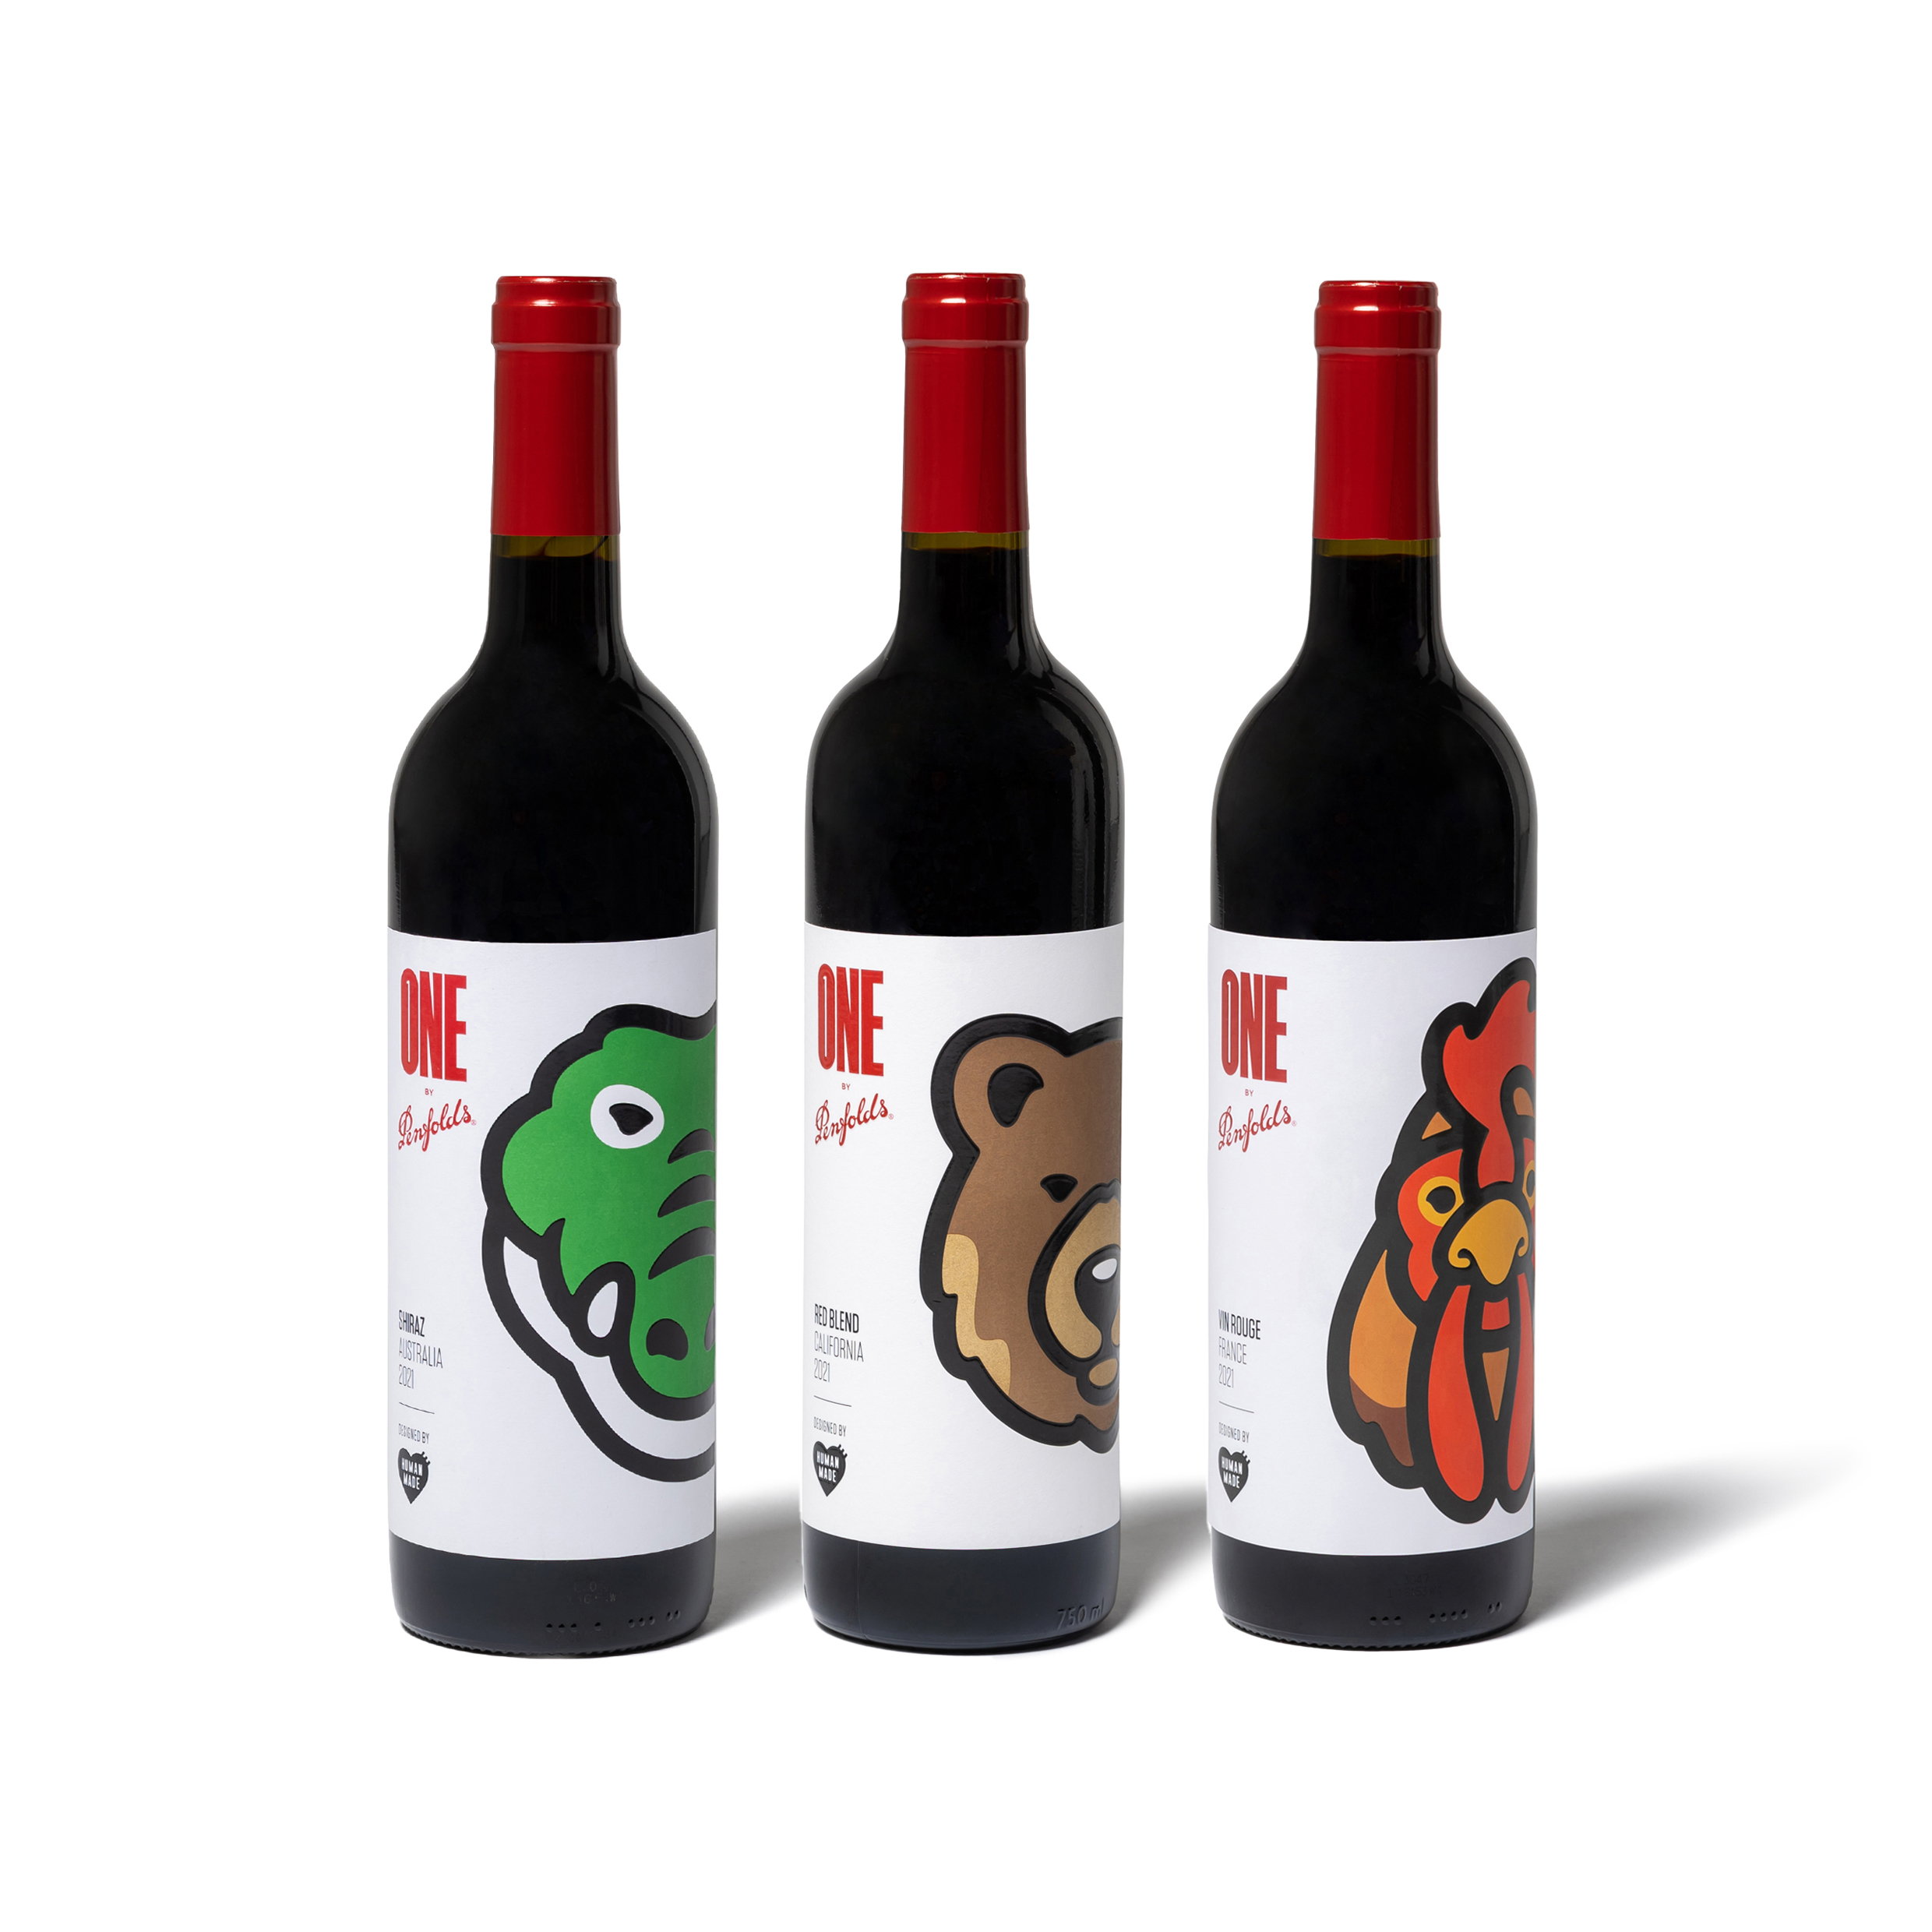 Human Made x Penfolds Collaboration: “One by Penfolds” Release